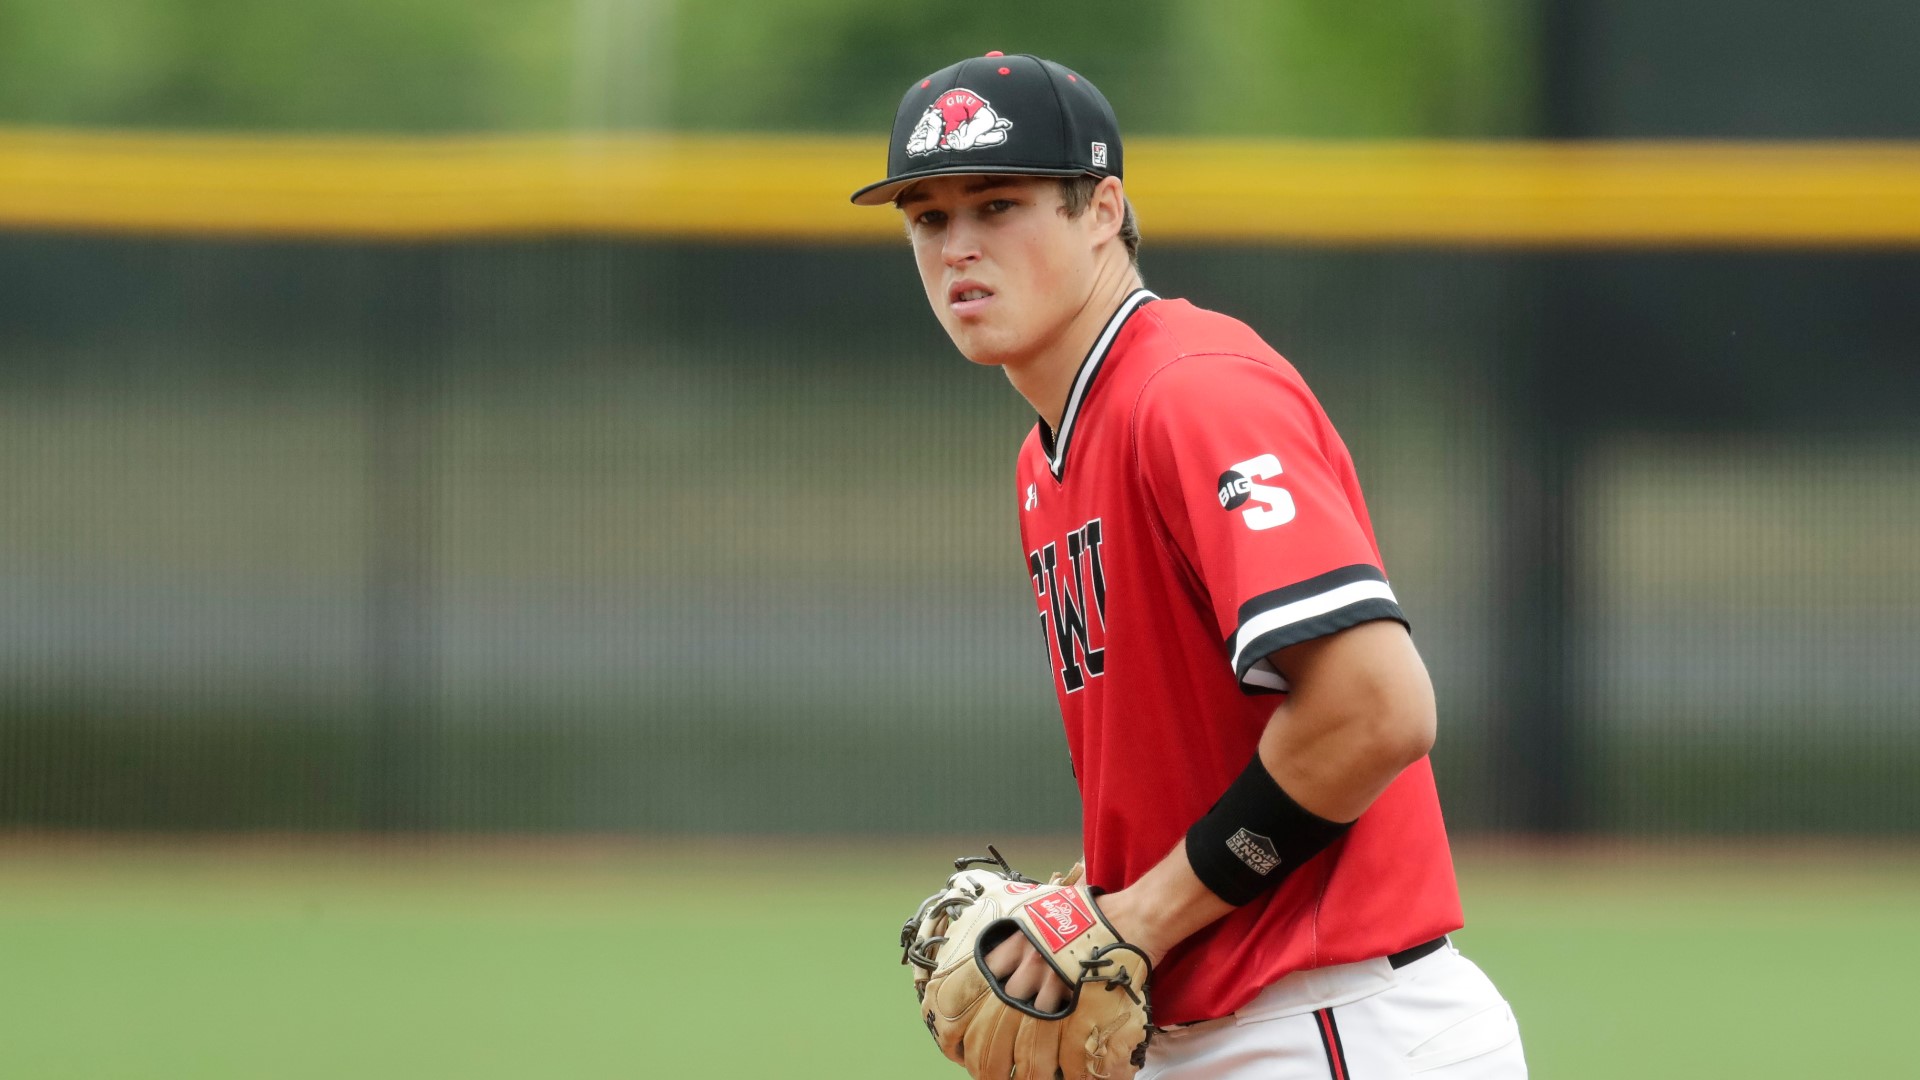 Gardner-Webb's Mason Miller is likely to be selected in this summer's MLB Draft